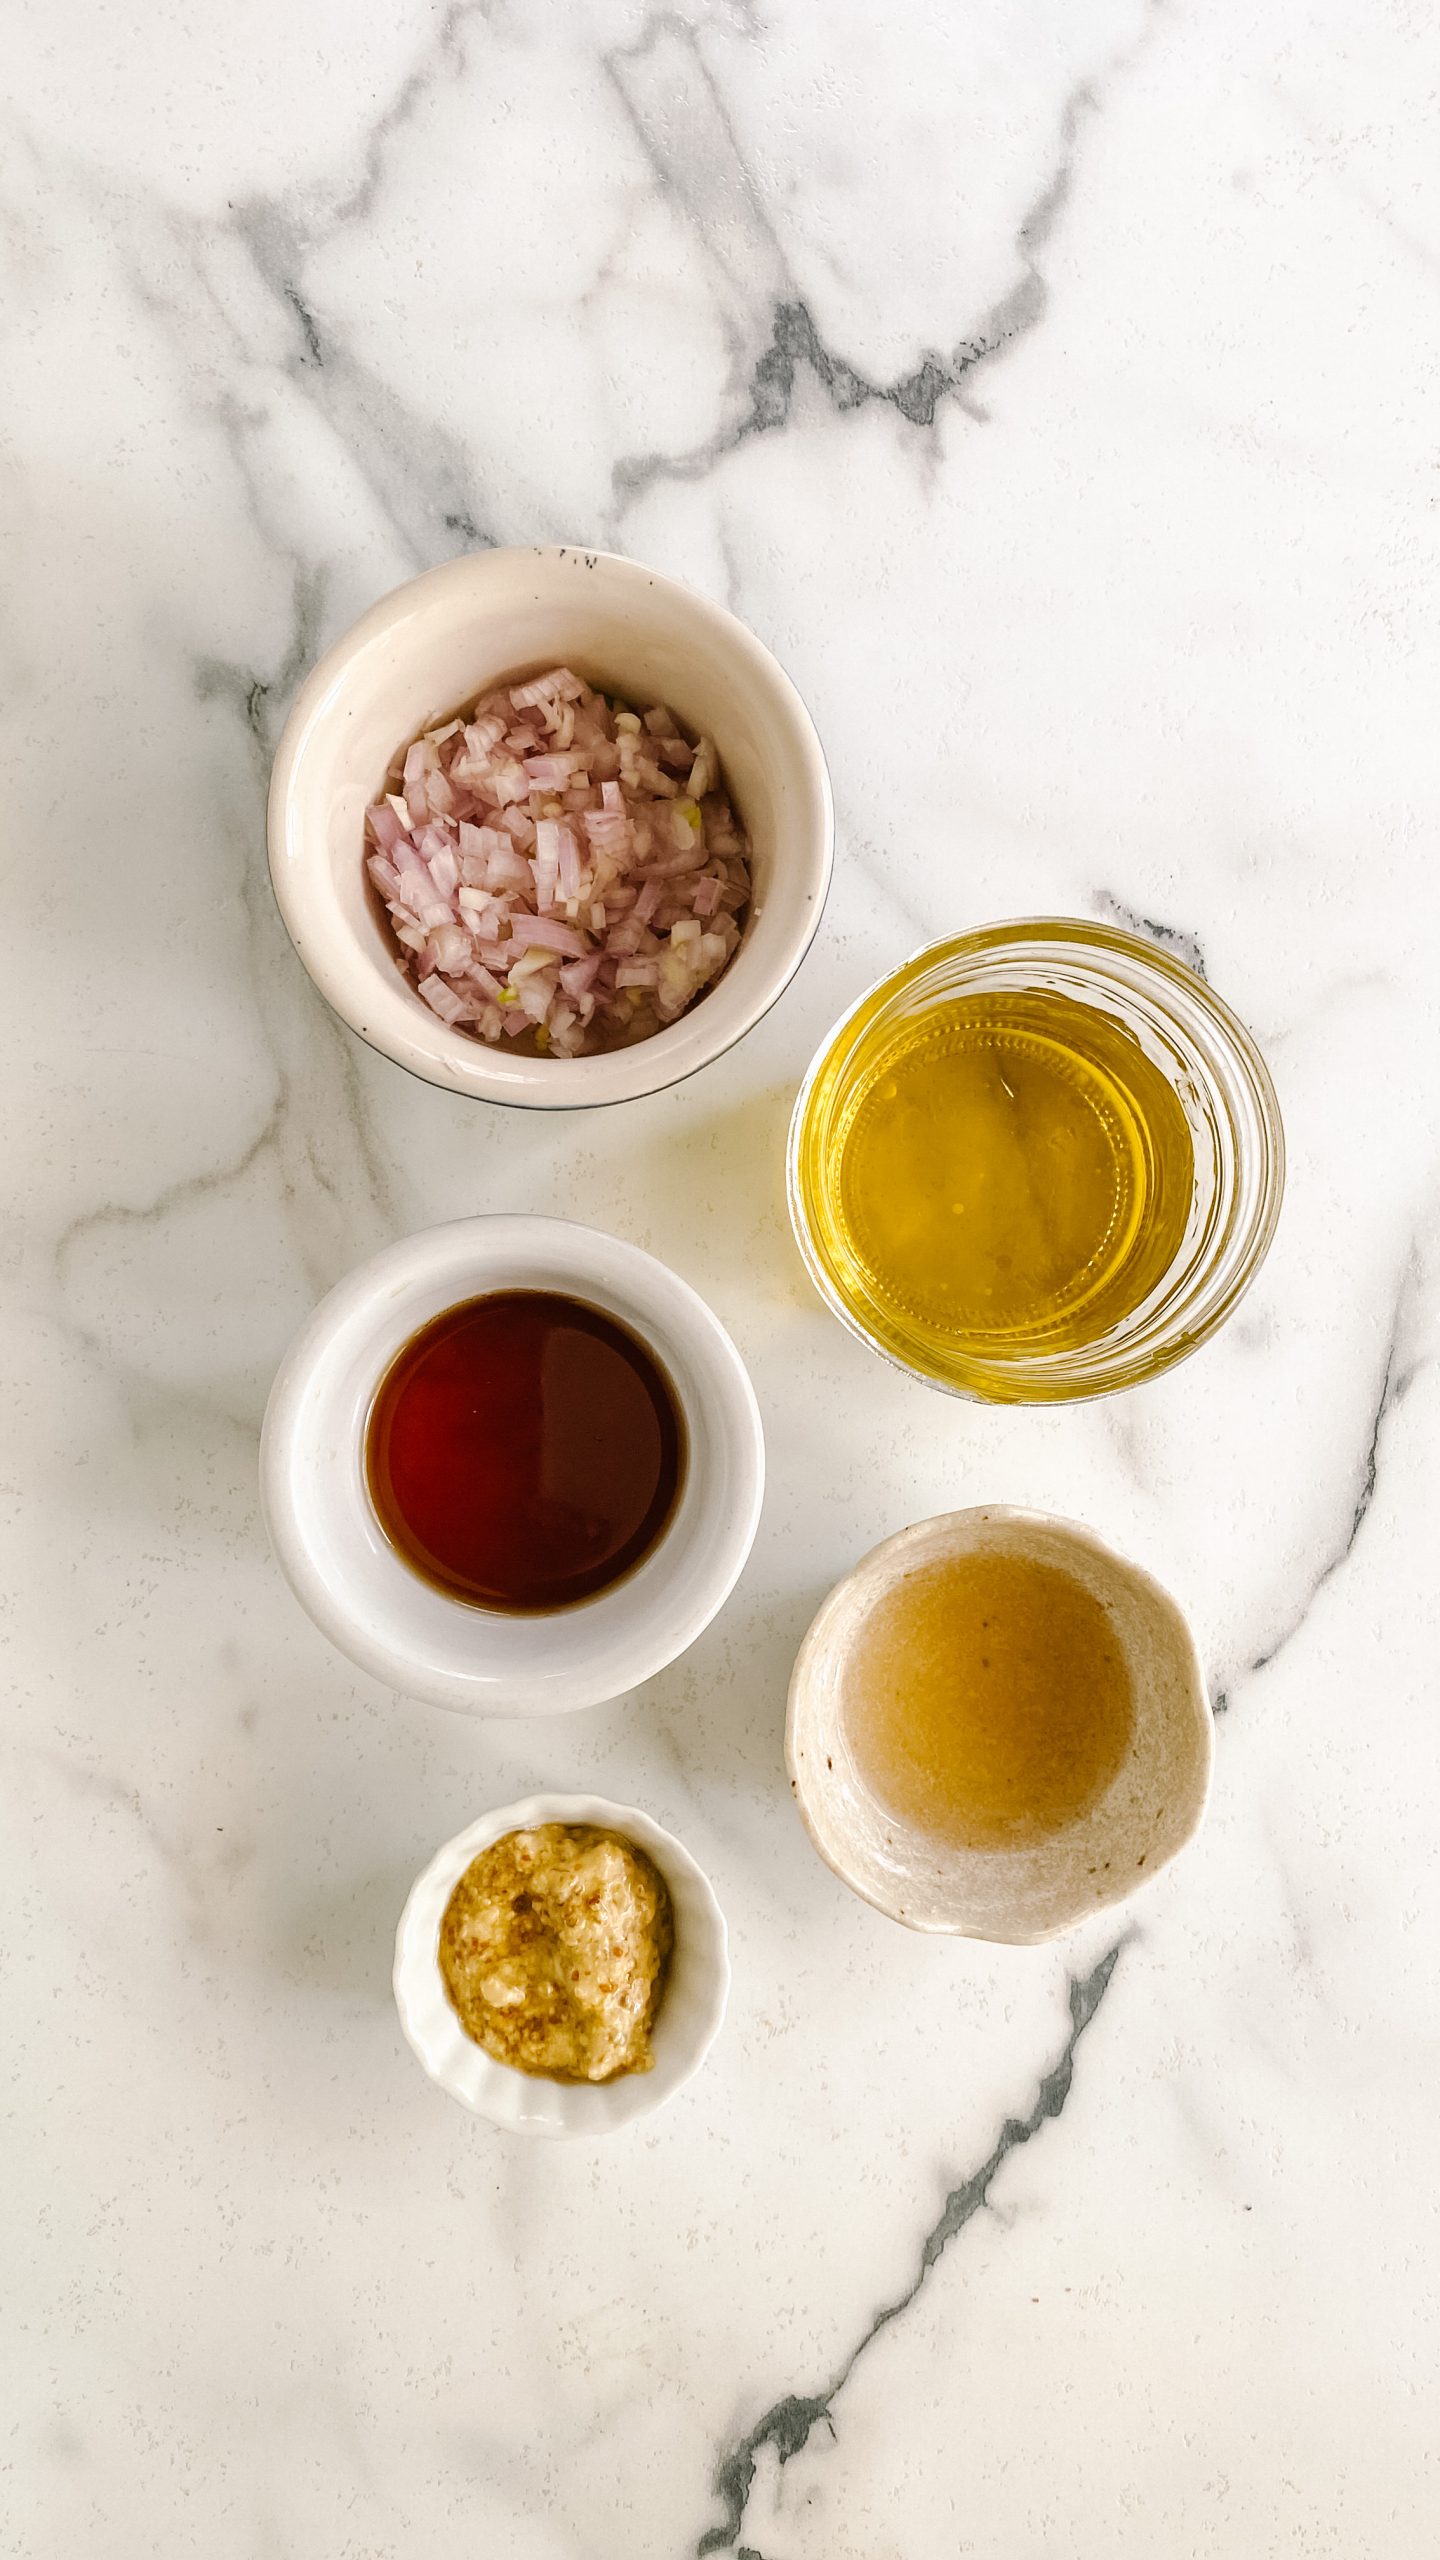 Dressing ingredients in small bowls on a white marble counter.